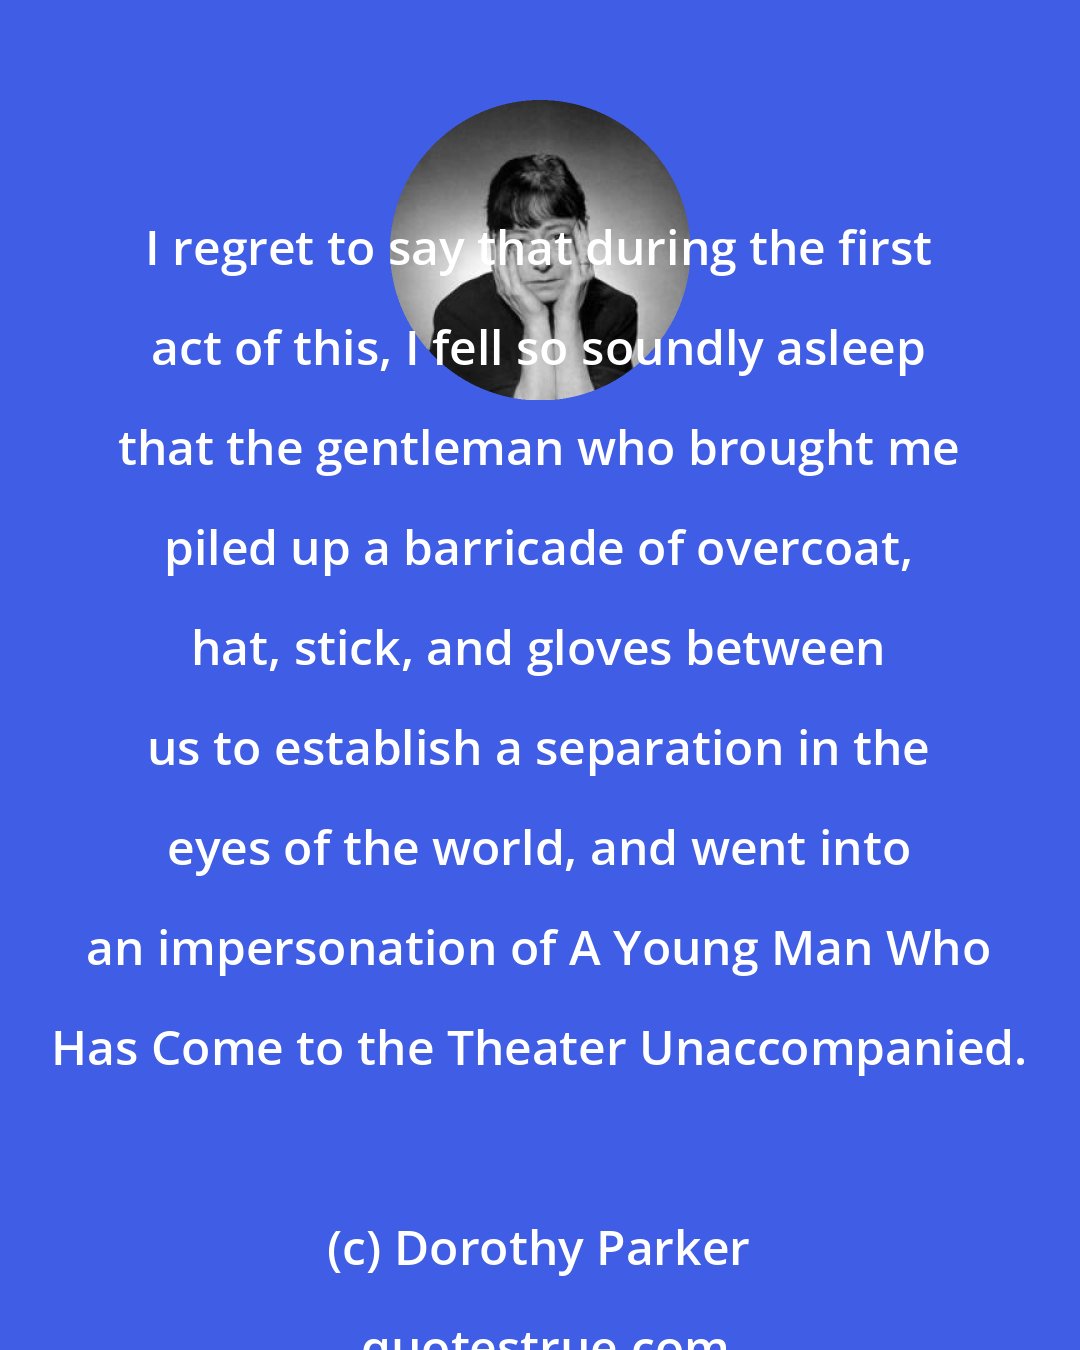 Dorothy Parker: I regret to say that during the first act of this, I fell so soundly asleep that the gentleman who brought me piled up a barricade of overcoat, hat, stick, and gloves between us to establish a separation in the eyes of the world, and went into an impersonation of A Young Man Who Has Come to the Theater Unaccompanied.